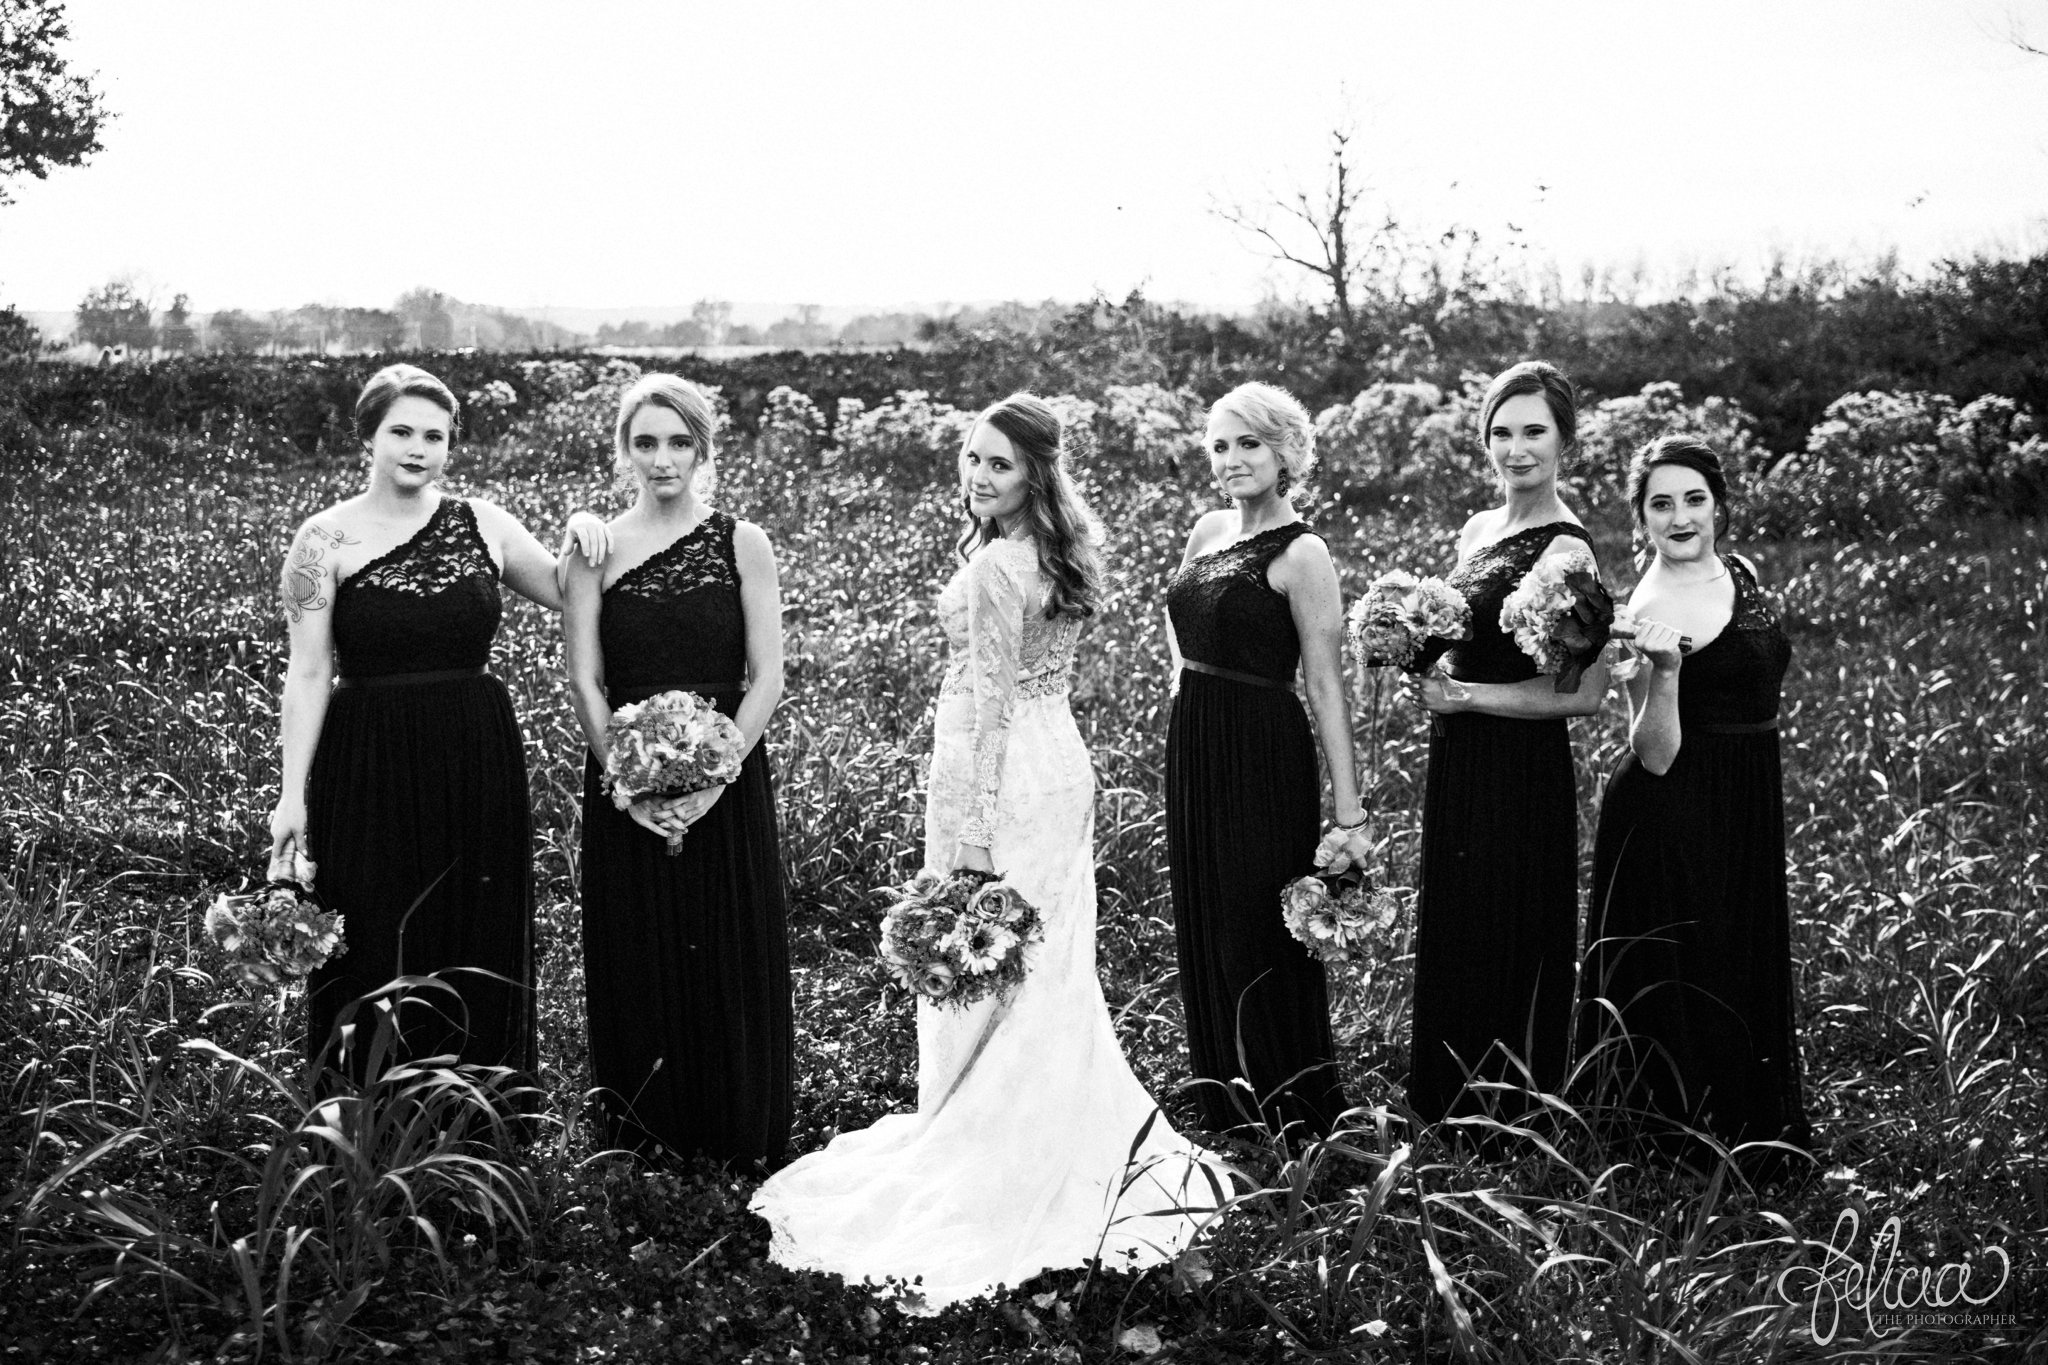 black and white | weddings | wedding photos | wedding photography | images by feliciathephotographer.com | St. Therese Catholic Church | Kansas City | downtown | The Terrace on Grand | bridal party portraits | grassy field | field | nature | bridesmaid portraits | black bridesmaid dresses | bridesmaids with the bride | sassy poses | strong poses 